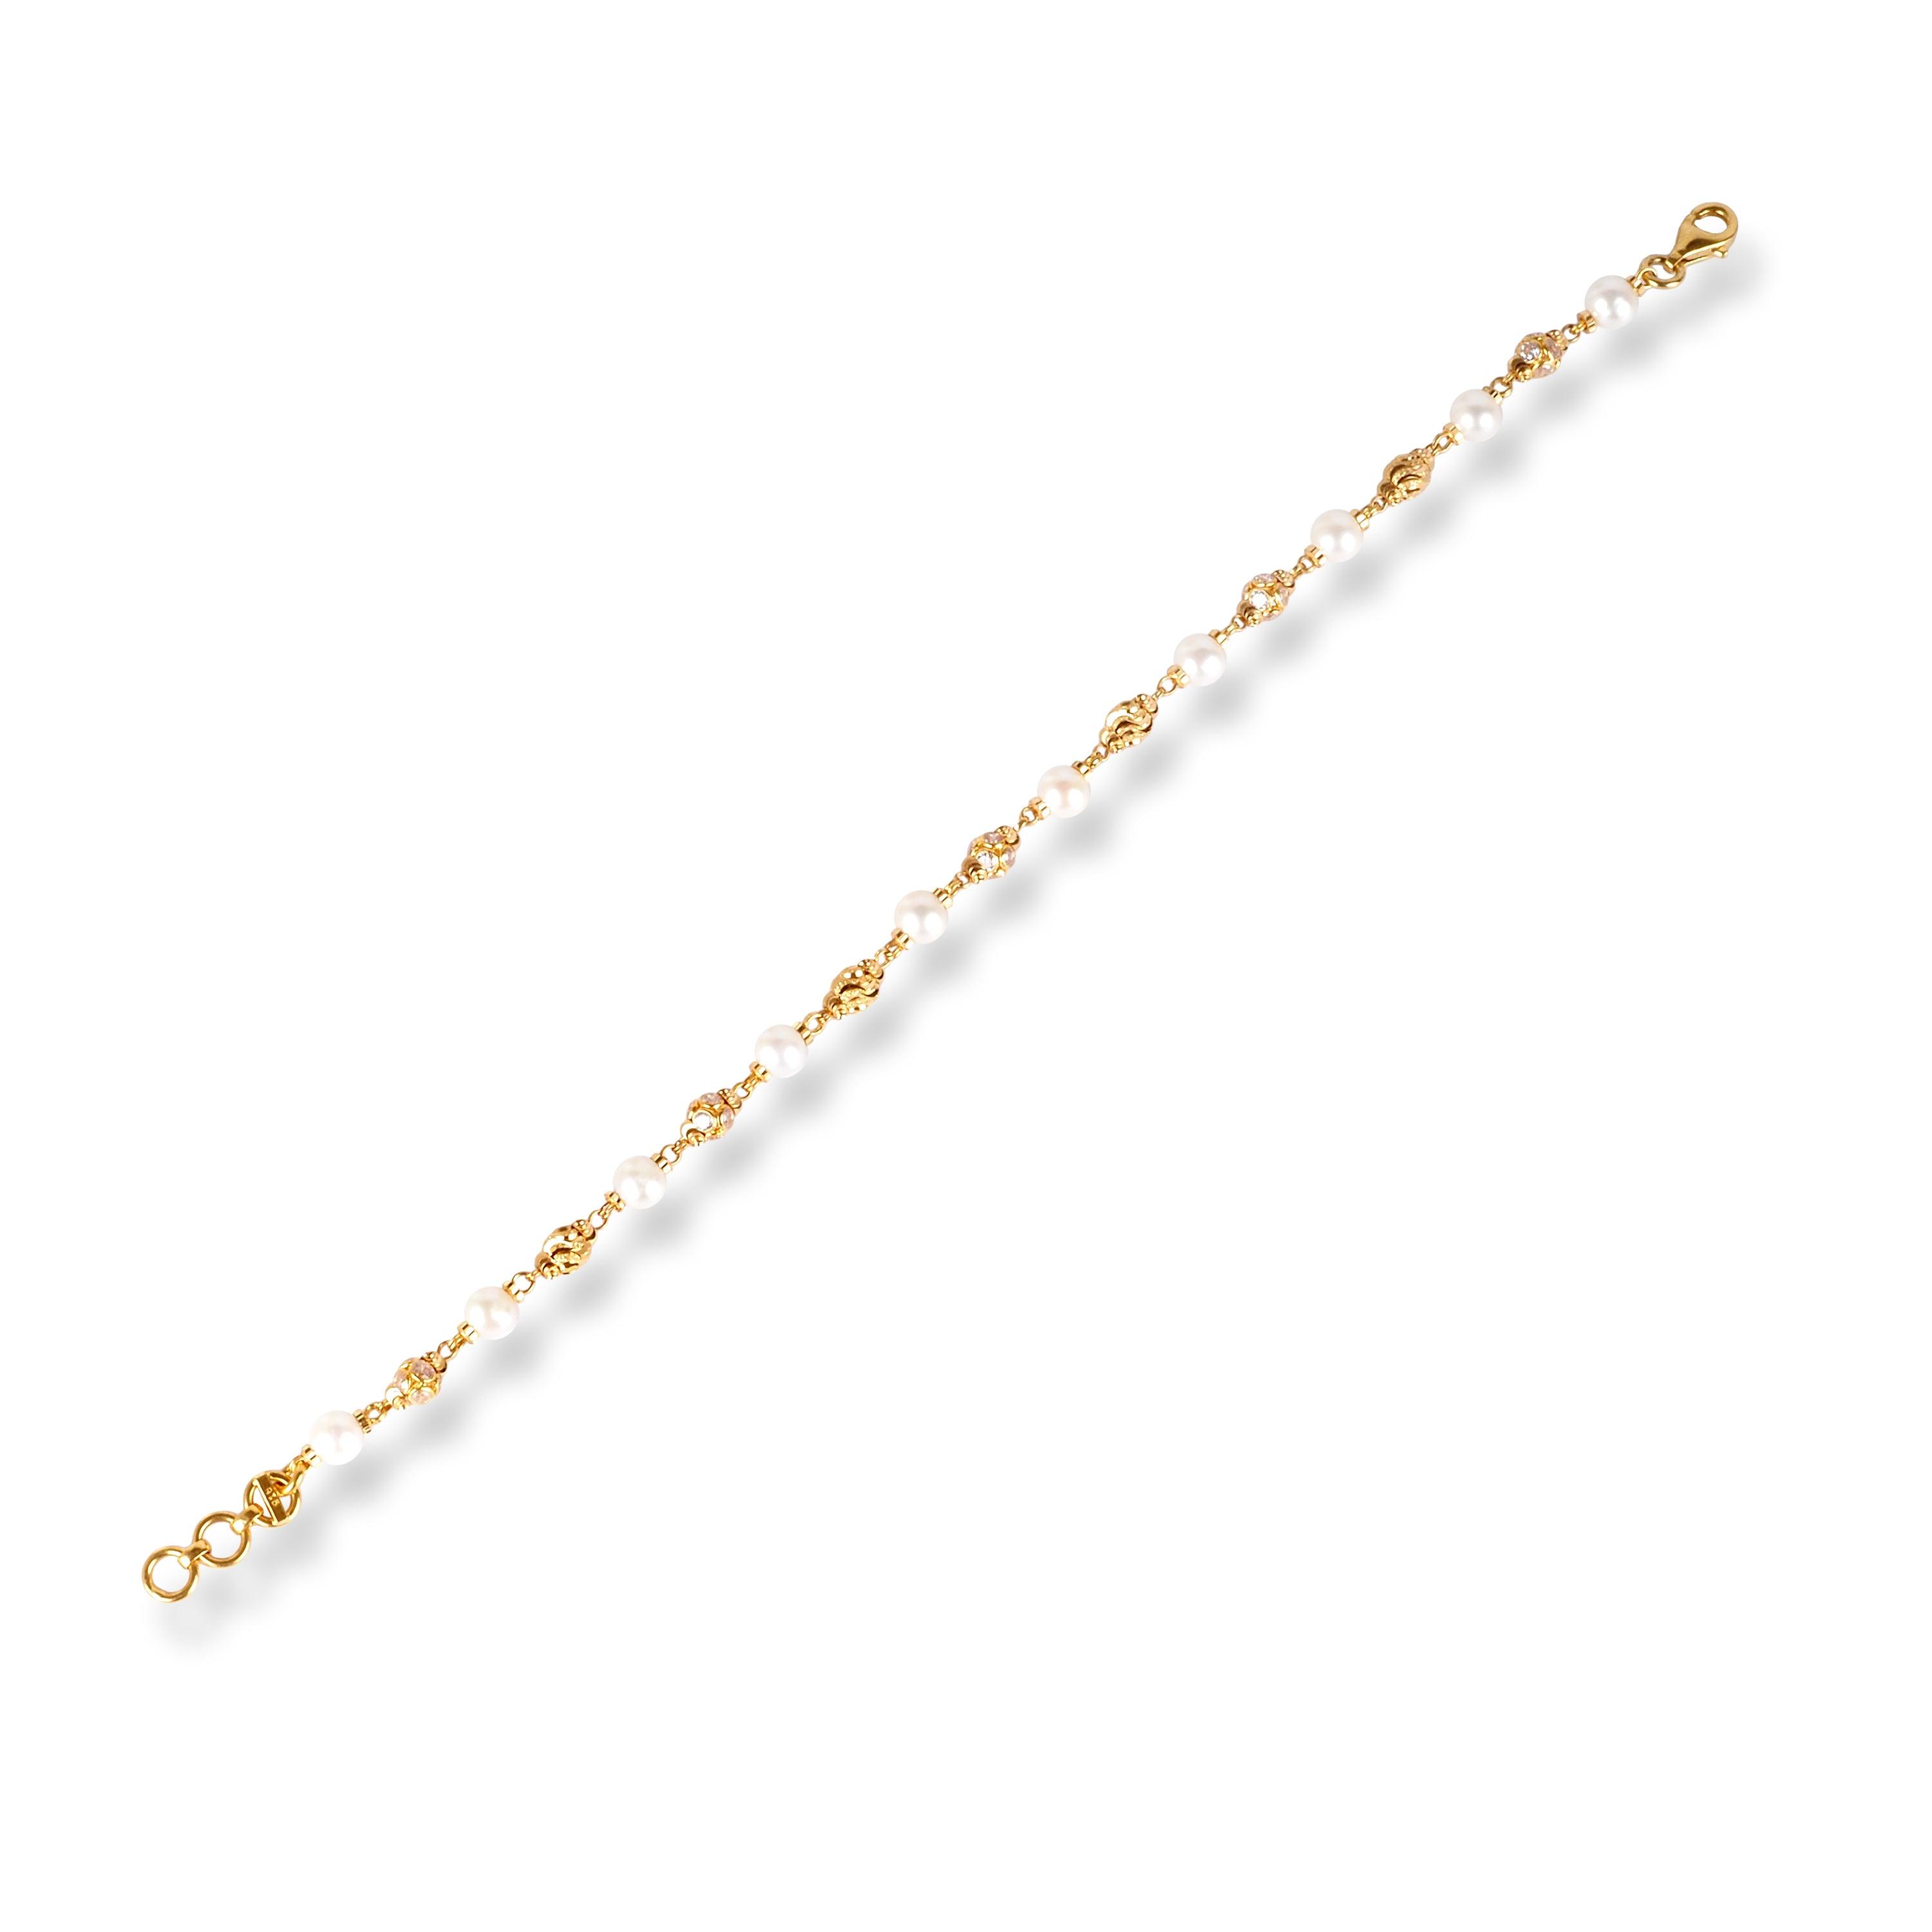 22ct Gold Bracelet with Pearl and Cubic Zirconia Stones LBR-7129 - Minar Jewellers